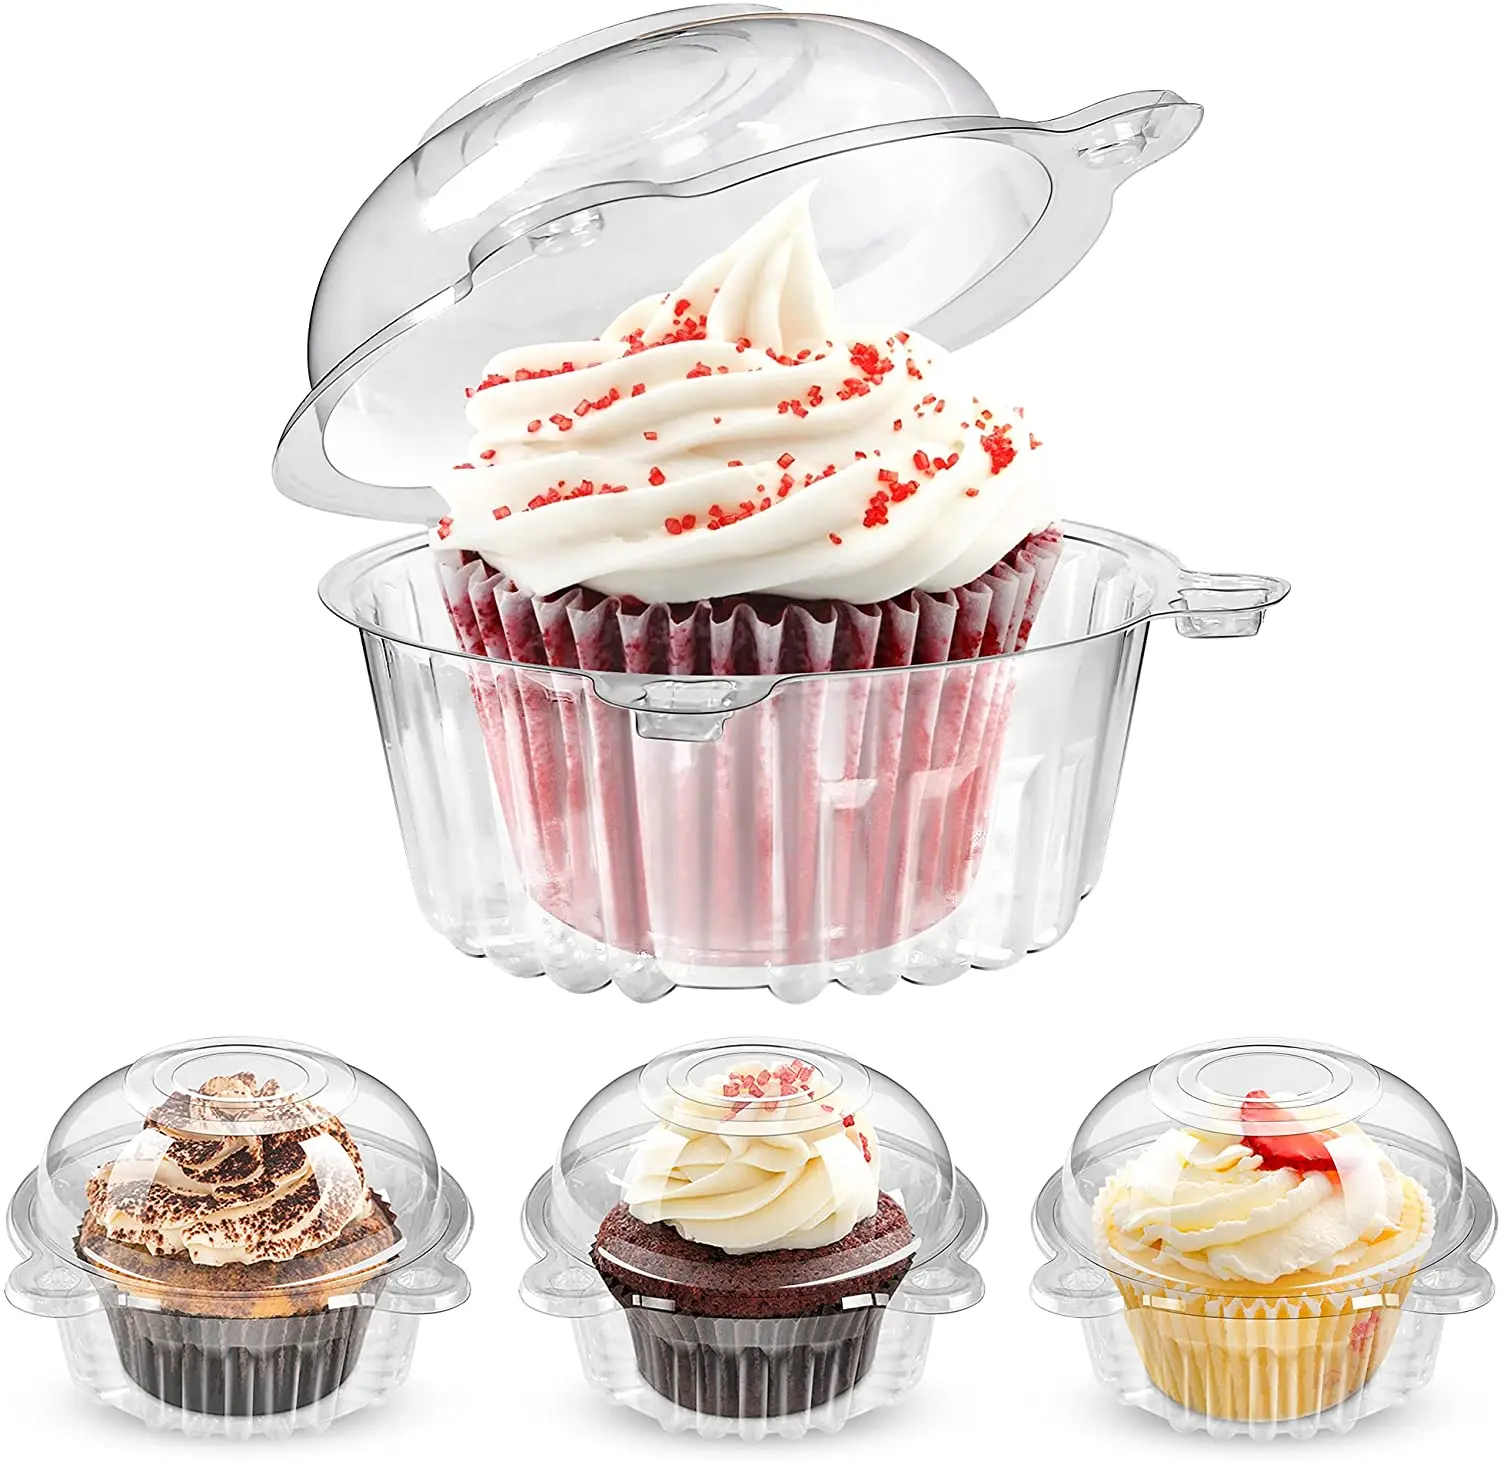 50 Pack Individual Cupcake Container,Clear Plastic Muffin Dome Holders Cases,Carrier Box Case for Wedding Birthday Party 